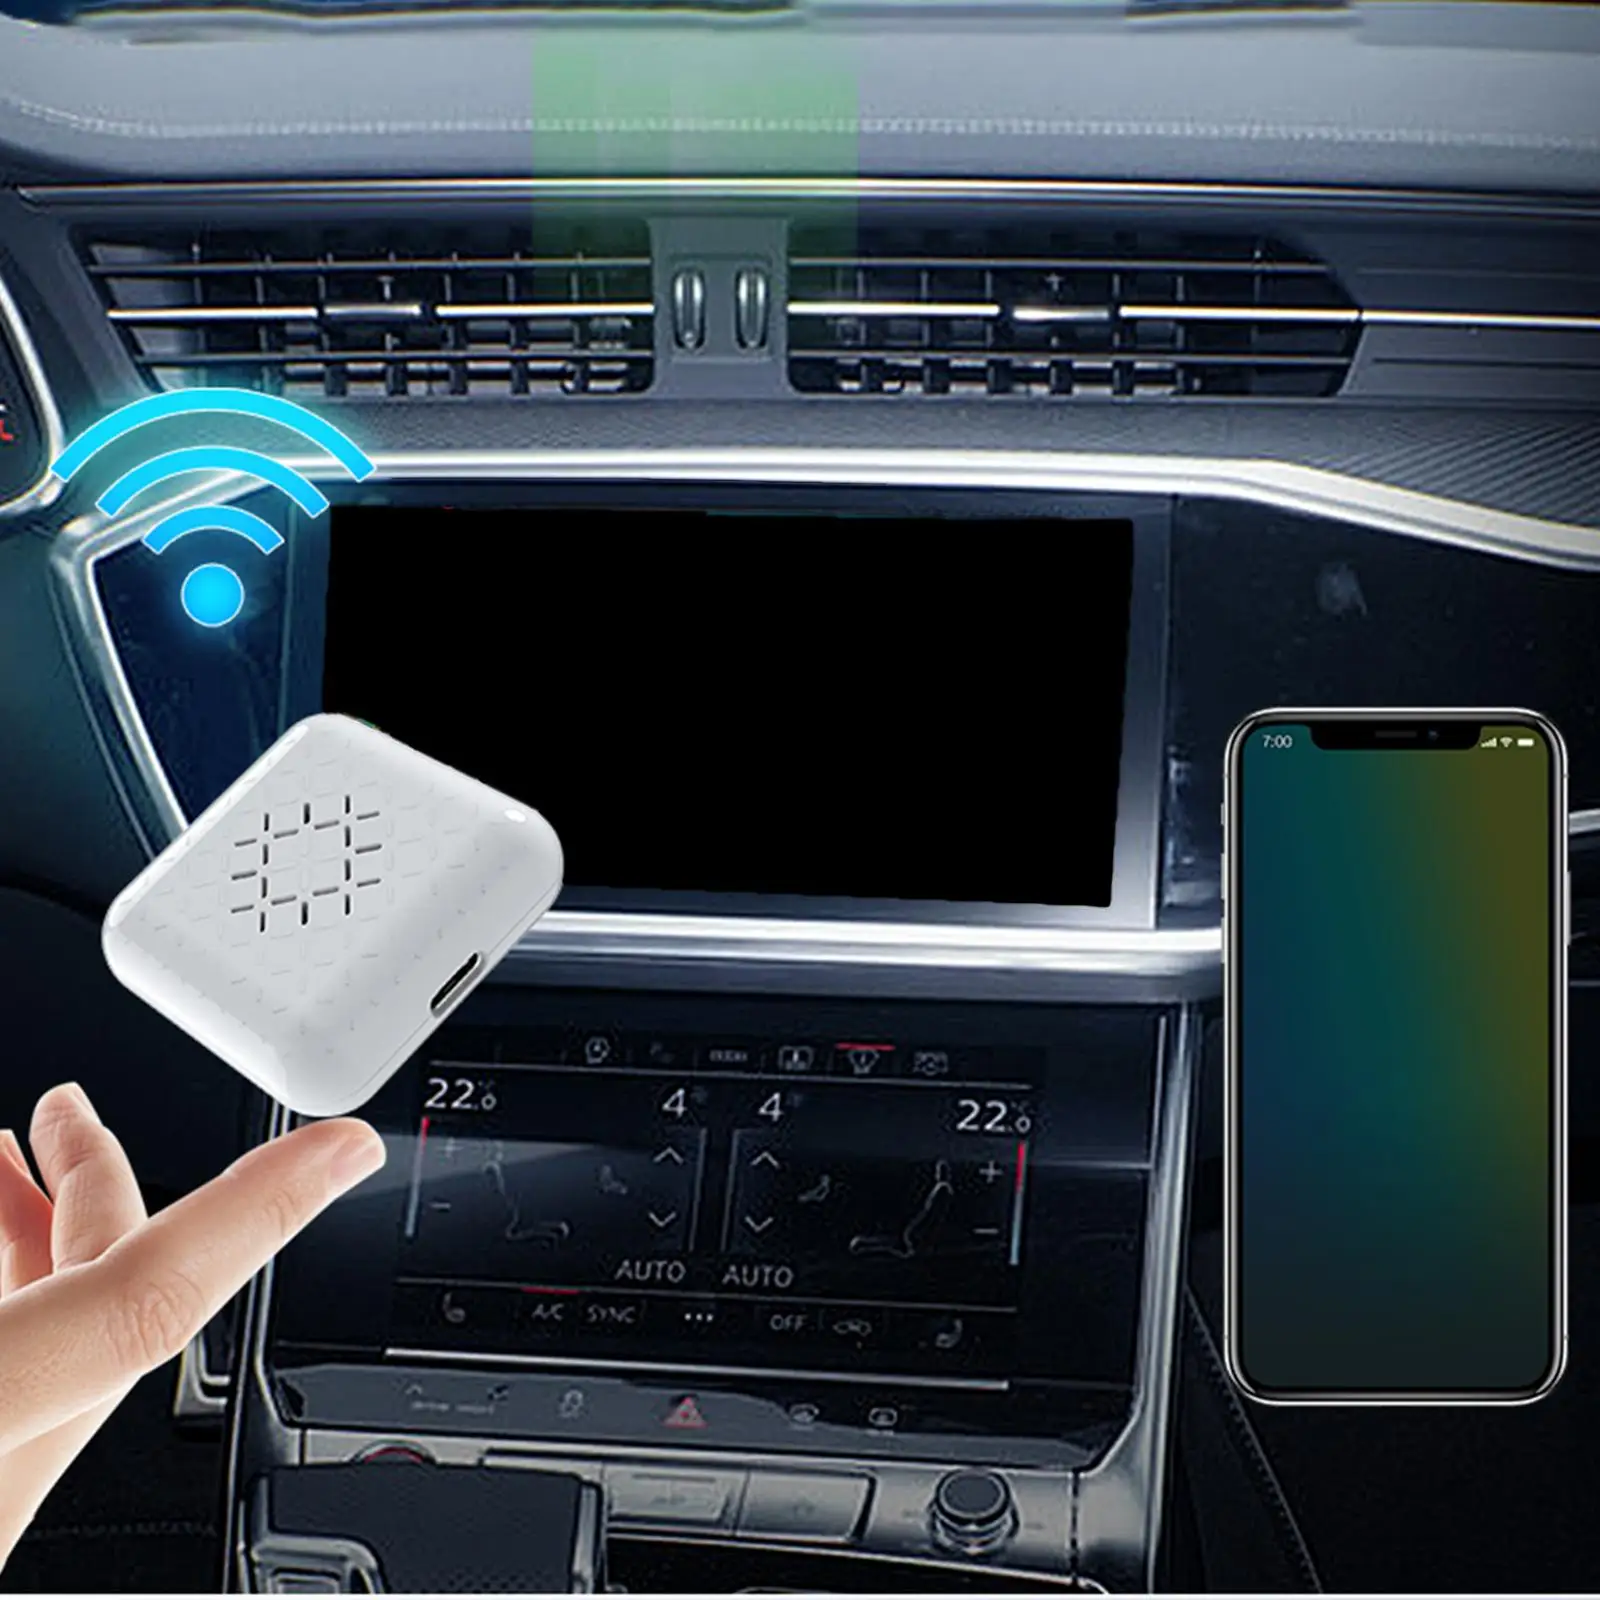 Mini Wireless Car Play Adapter, Plug & Play 5G WiFi Easy Setup Wireless Interconnection Box for Cars with Car Play Function